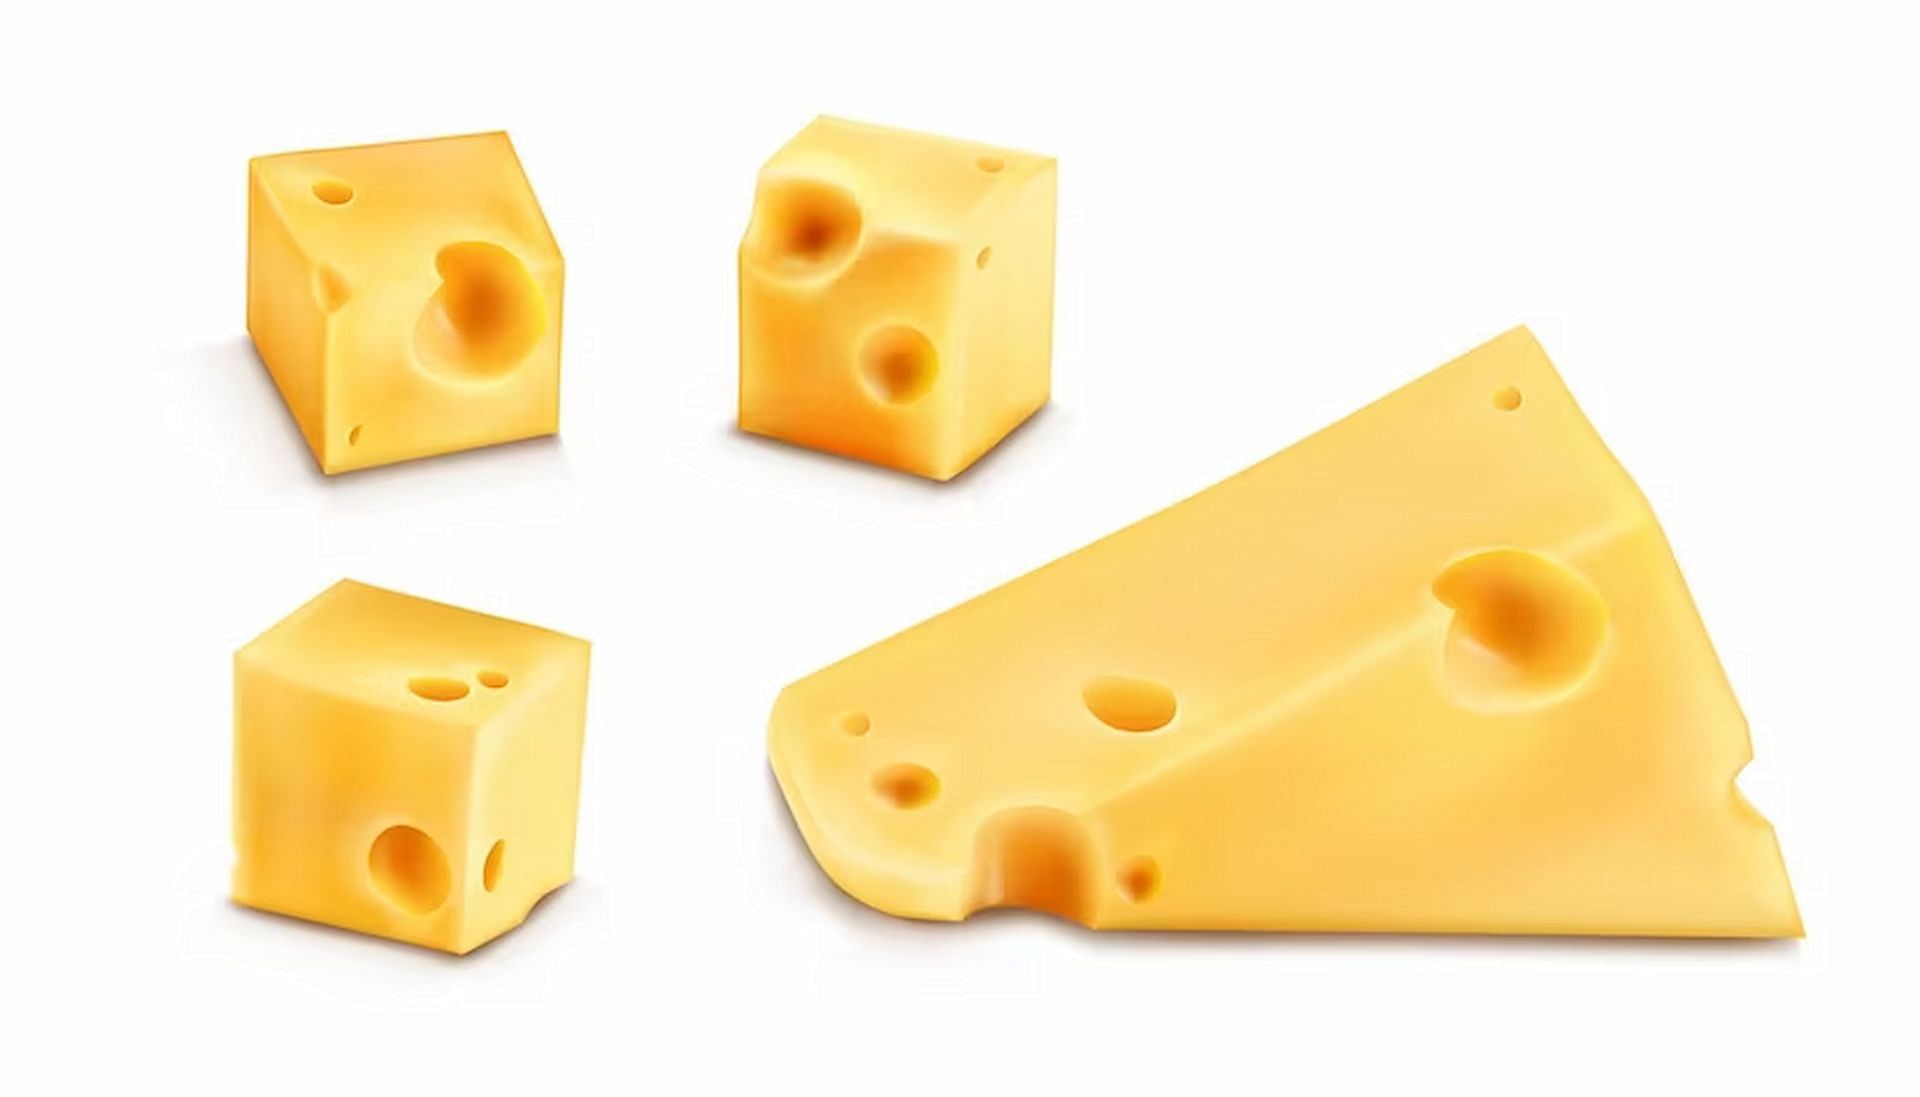 Cheese can be exceptionally excellent for your mind wellbeing, reveals new analyze